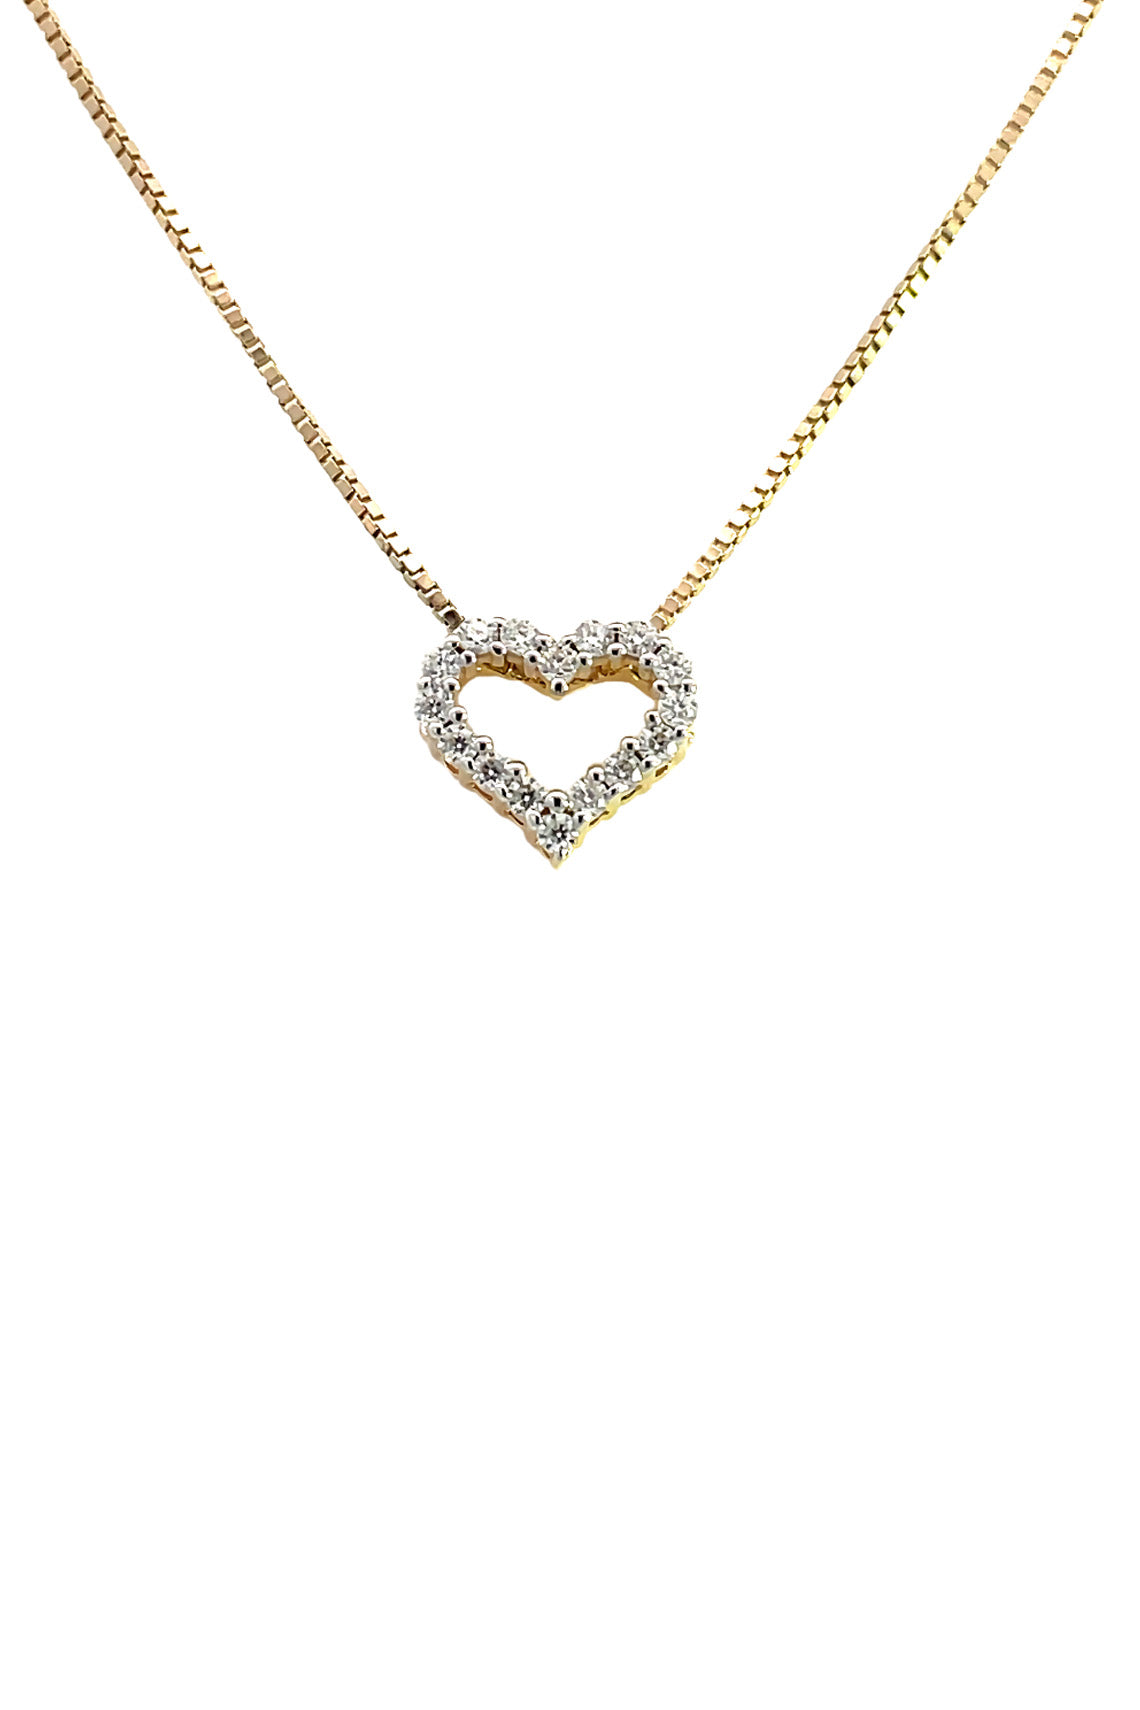 HEART 0.15TCW IN 9CT YELLOW GOLD PENDANT